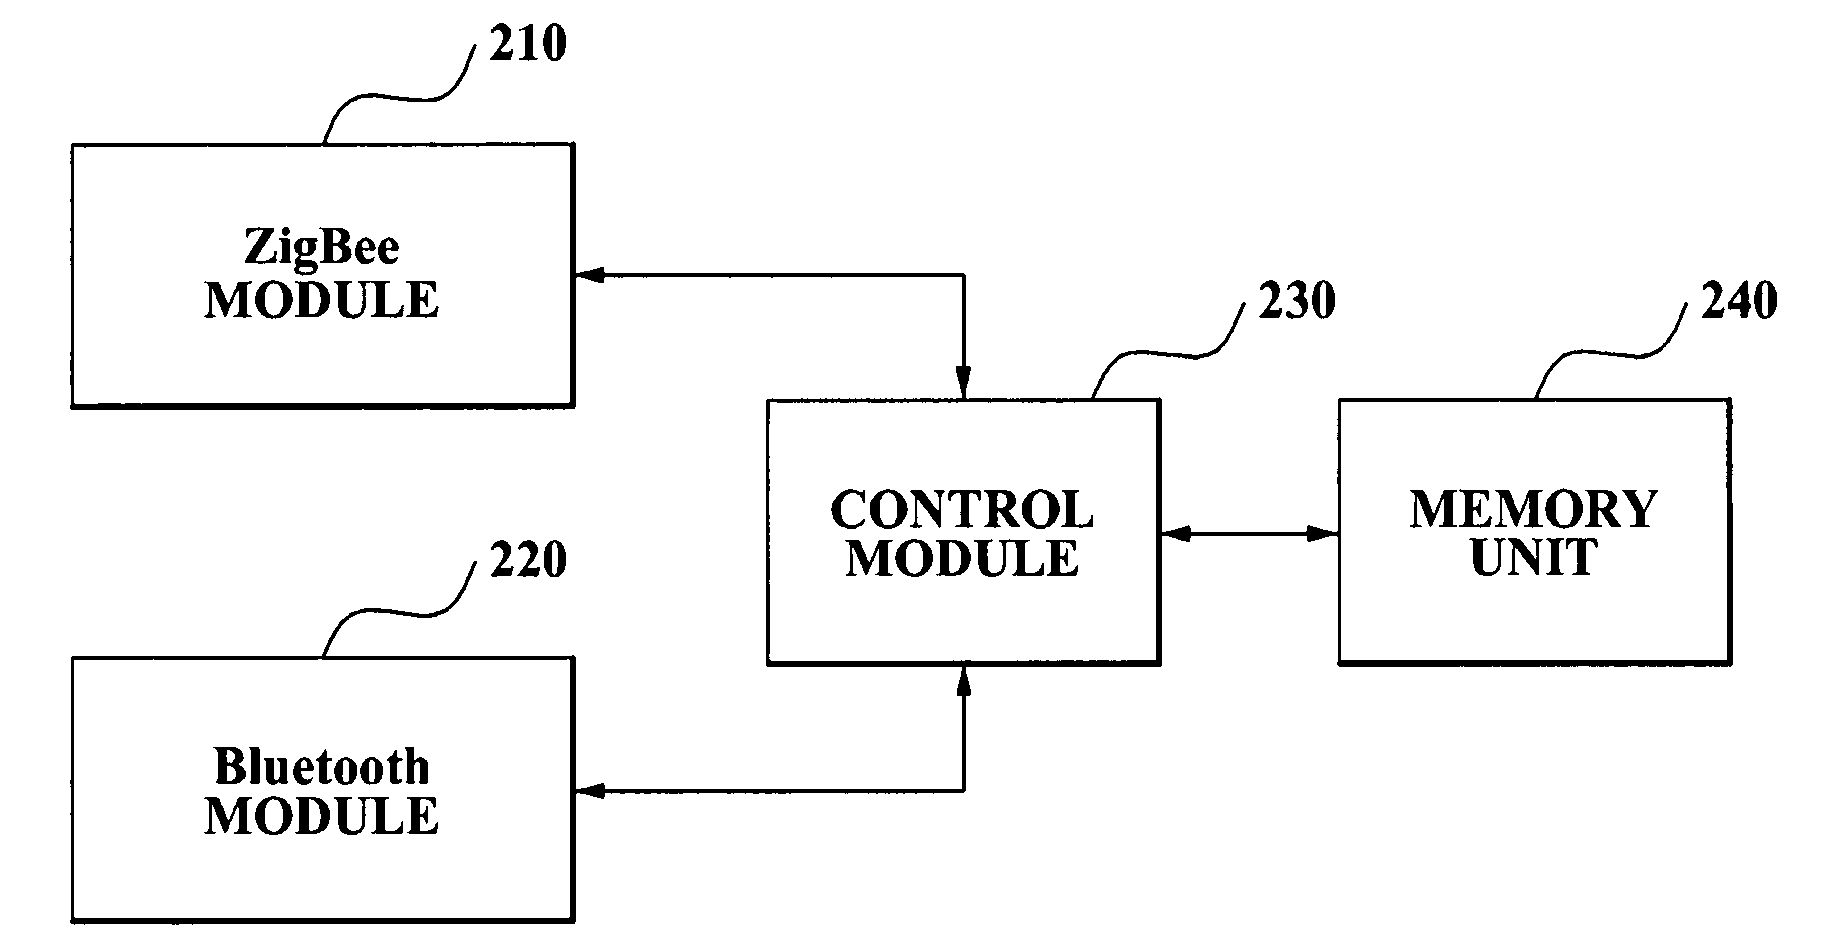 Connection setting method between devices on wireless personal area networks